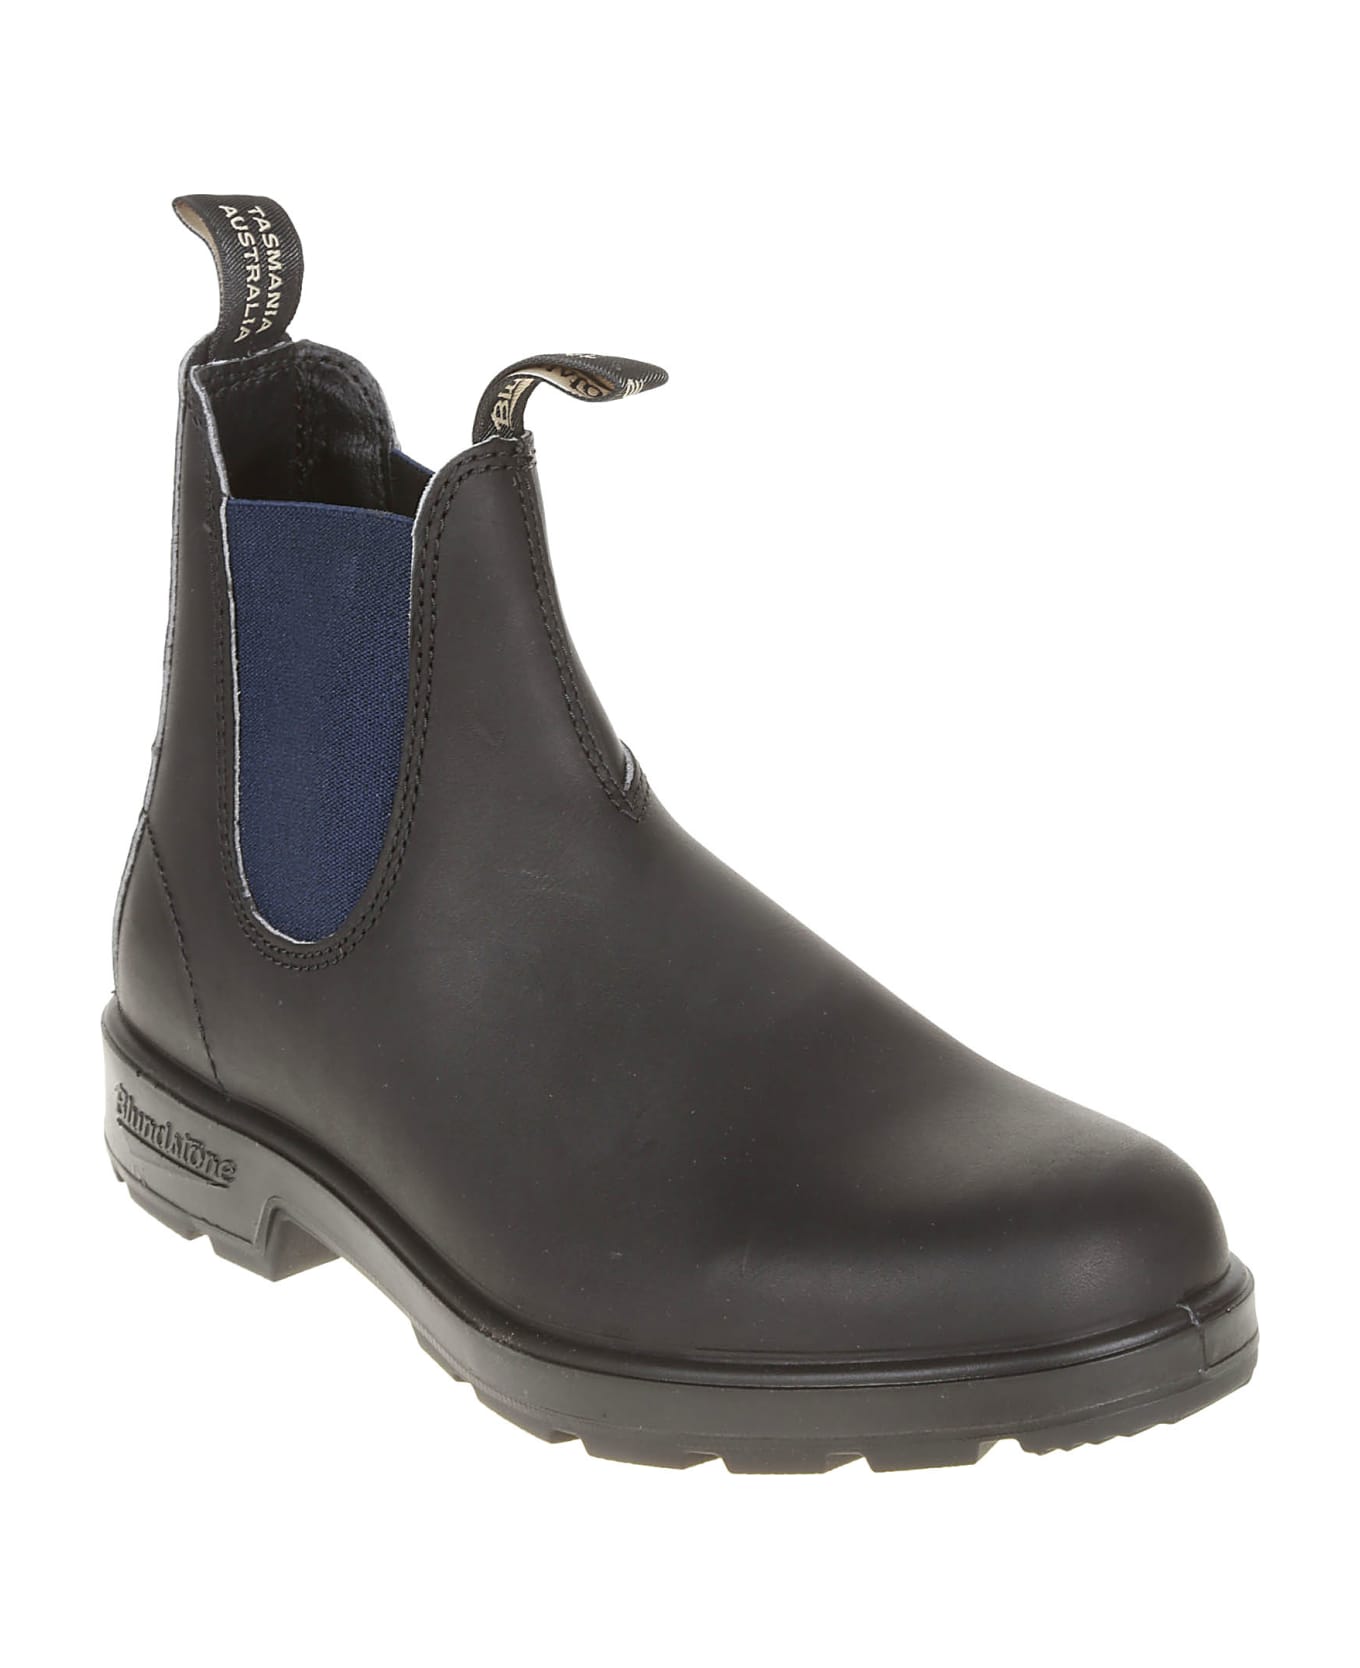 Blundstone Colored Elastic Sided Boots - Black/Navy ブーツ